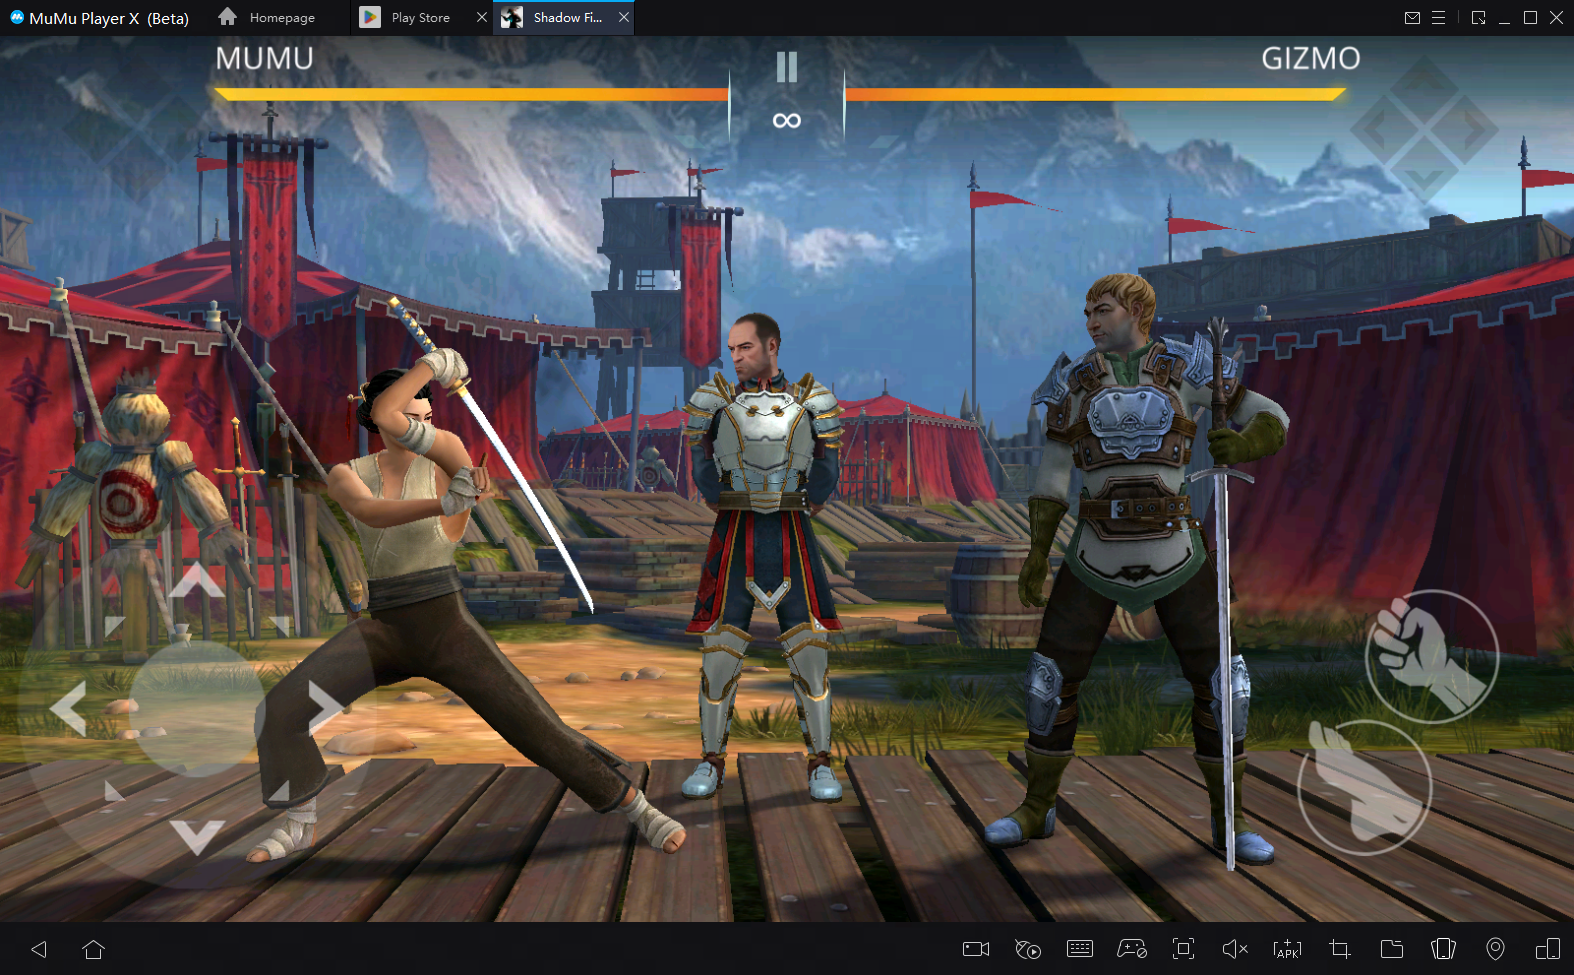 How to Play Shadow Fight 3 - RPG fighting game on PC with MuMu Player X